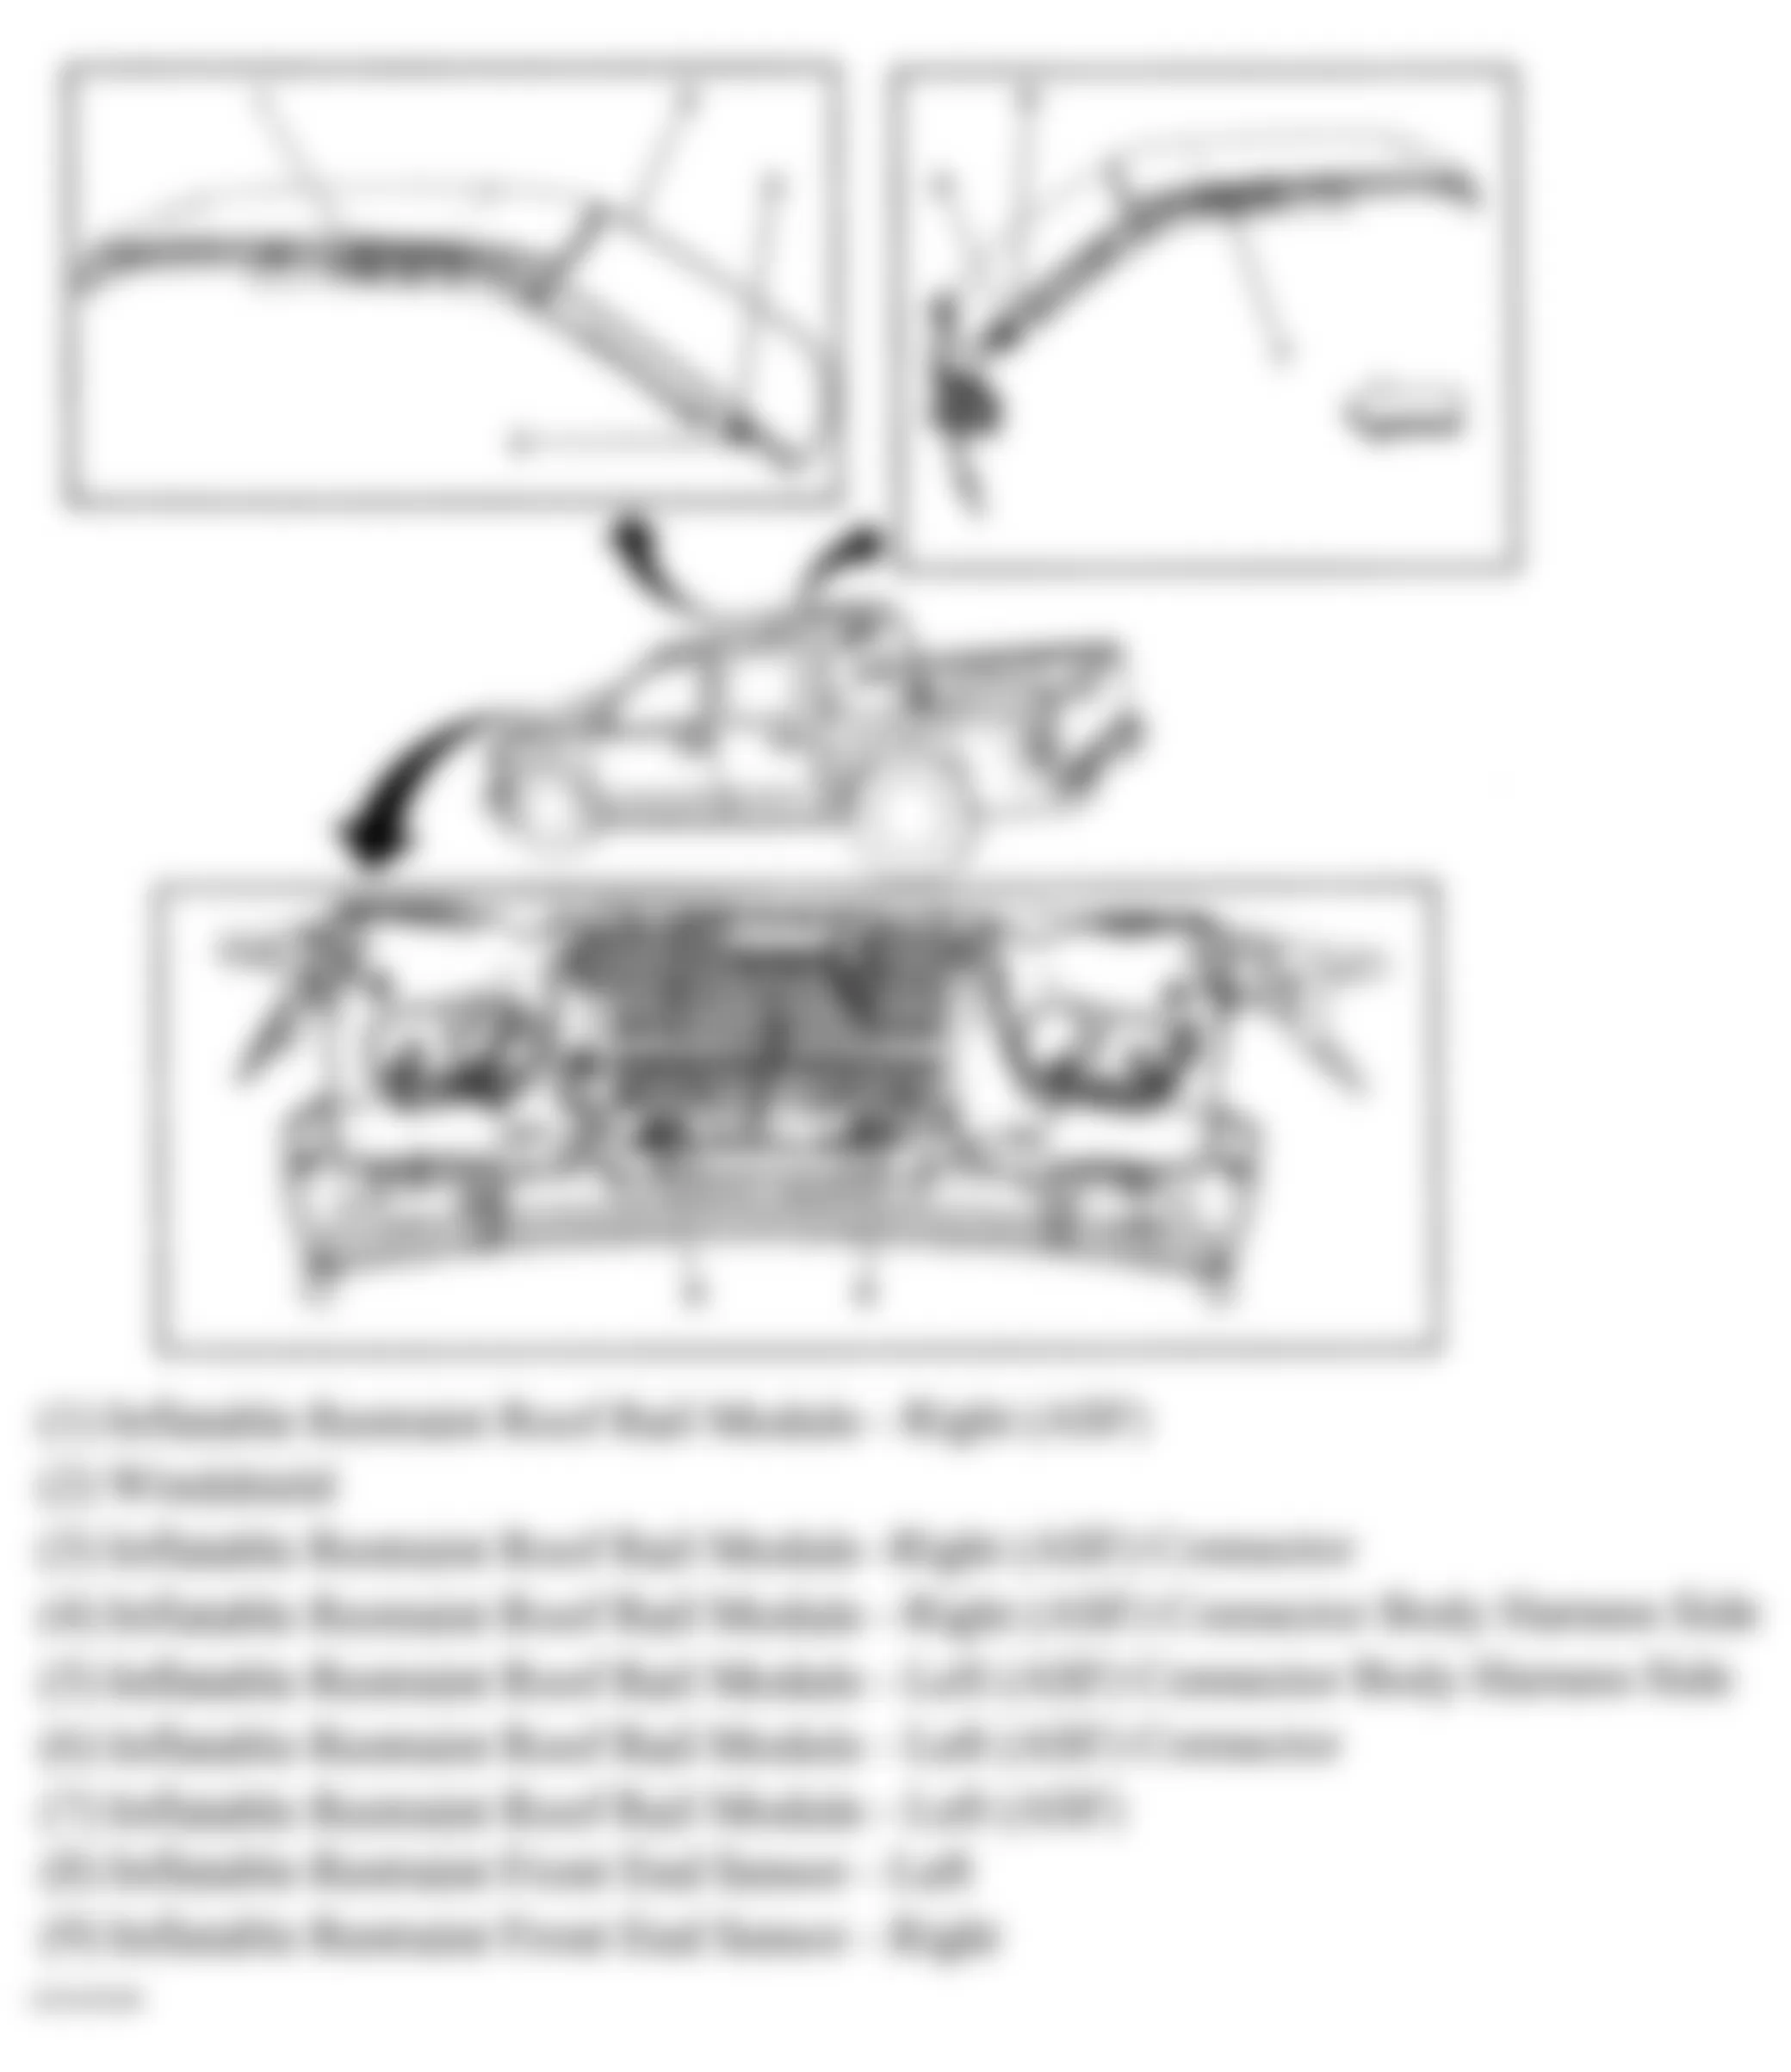 Isuzu i-290 LS 2007 - Component Locations -  SIR System Front/Roof Rail